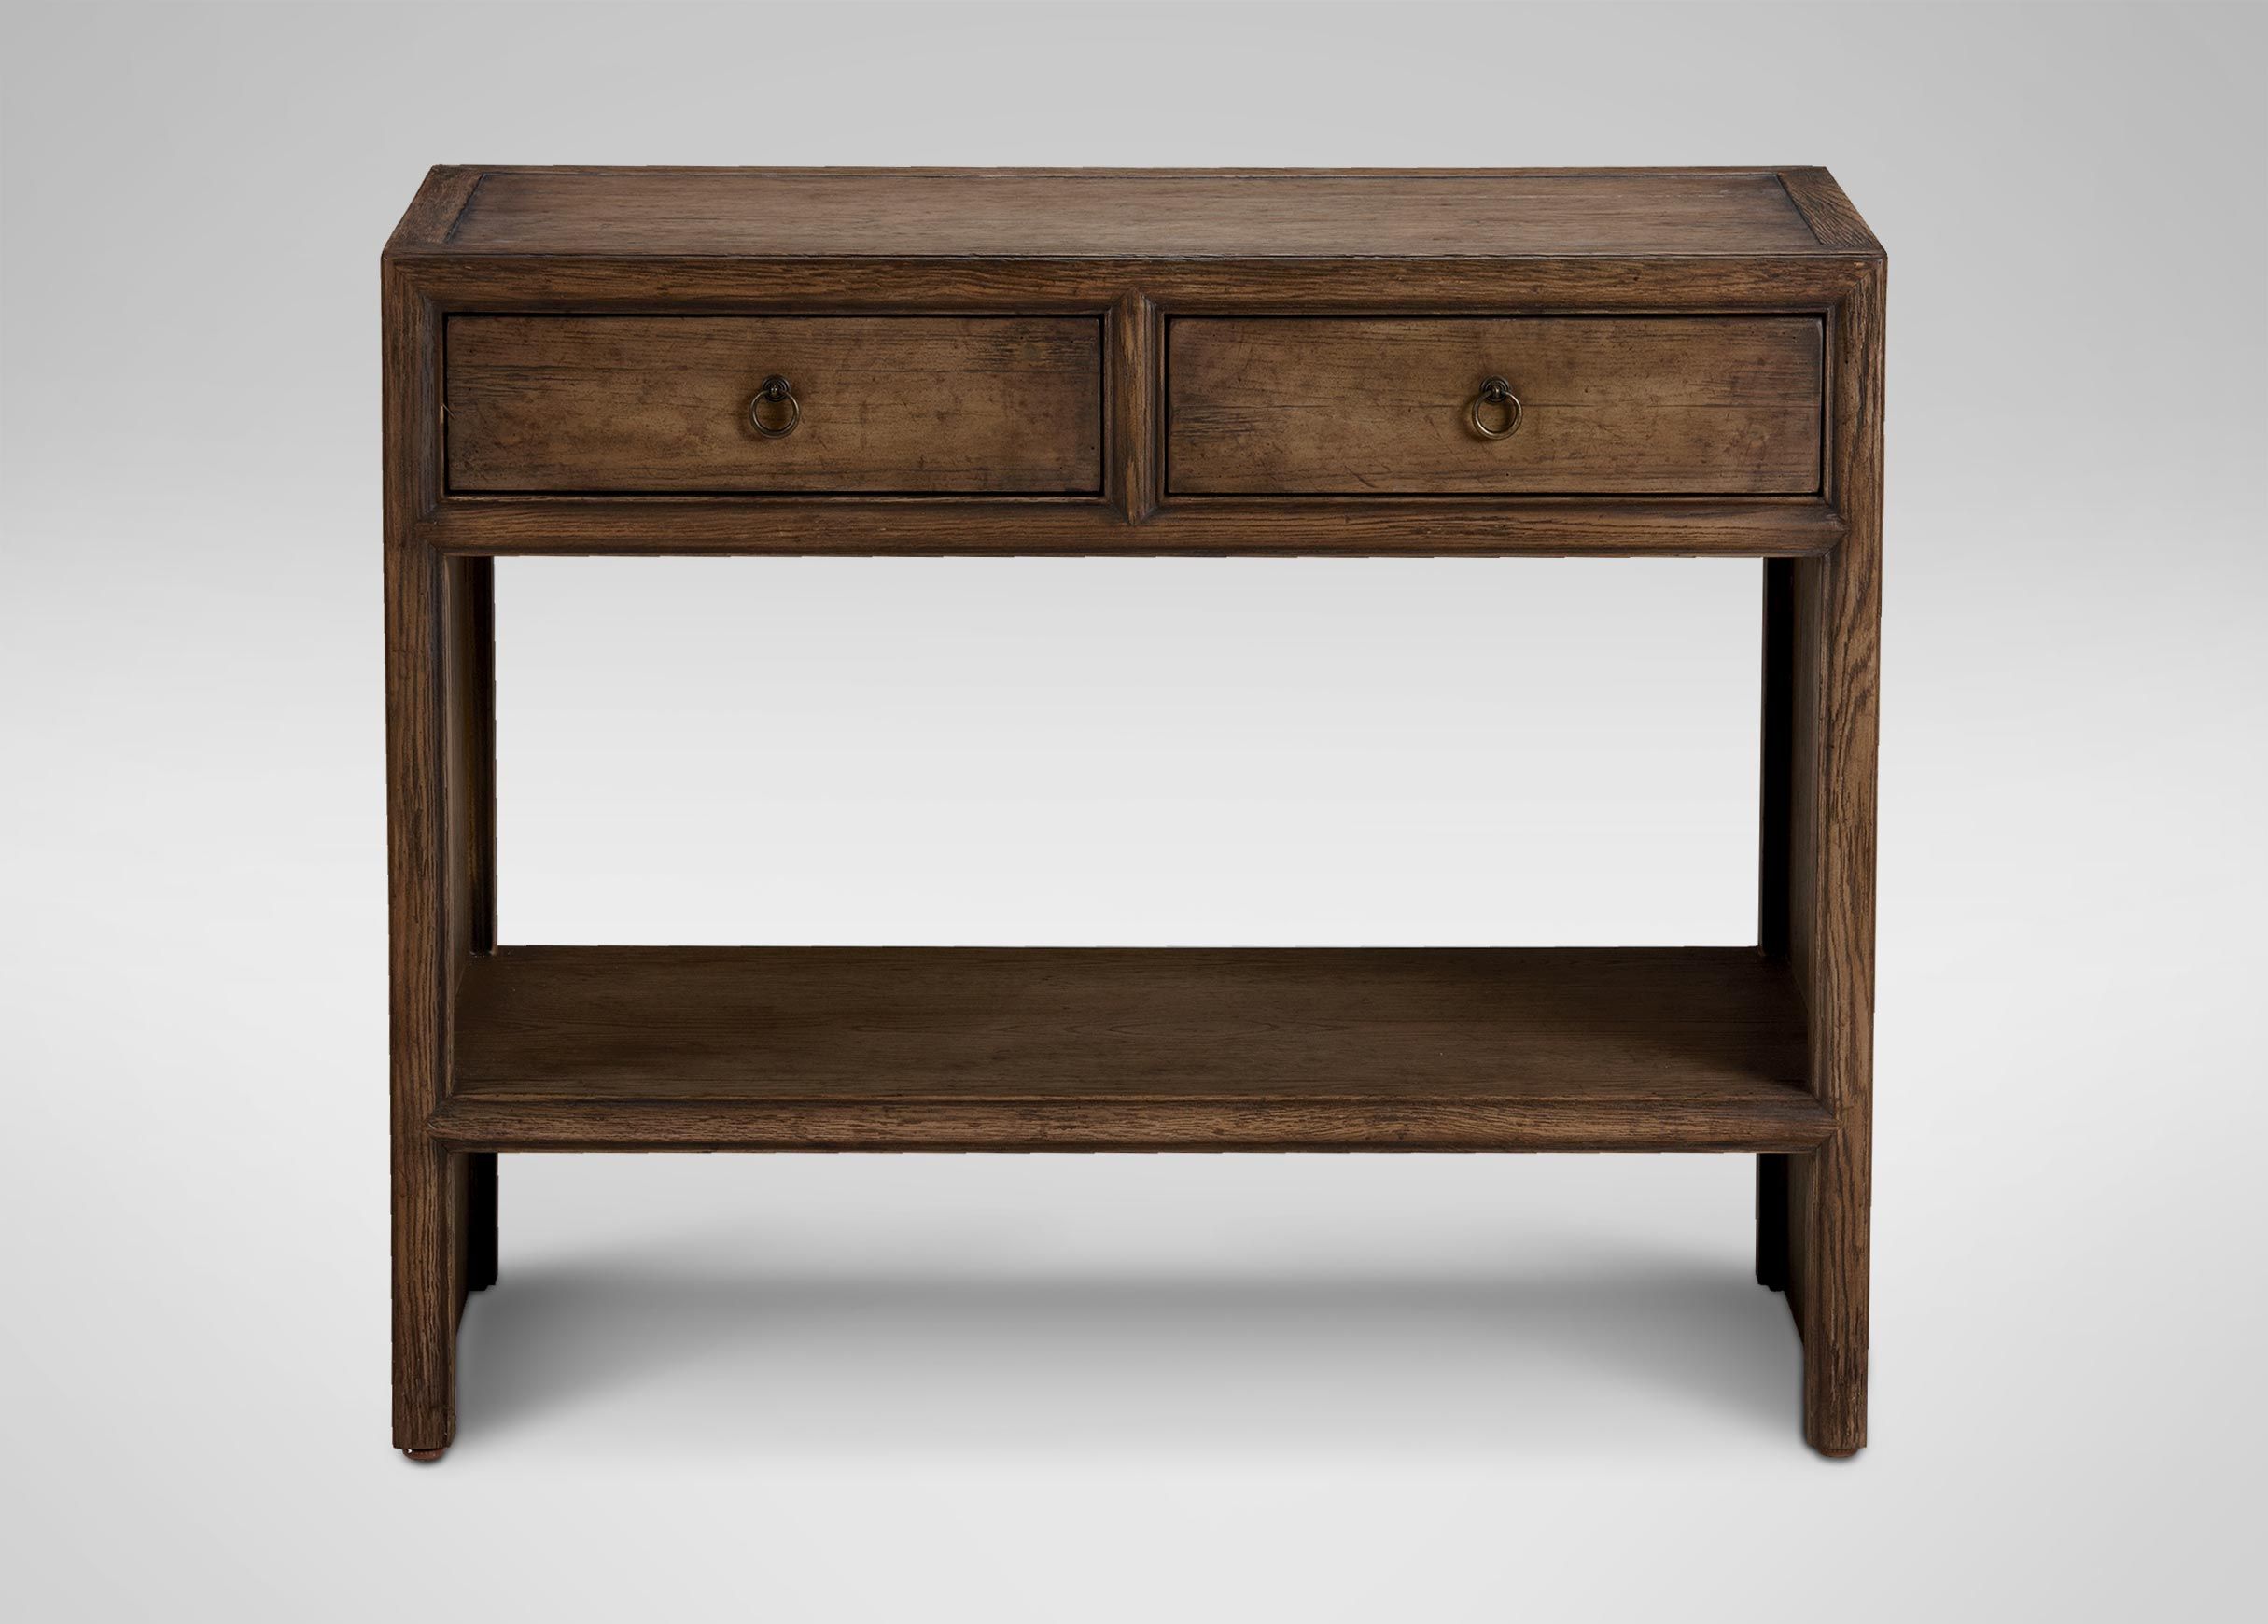 Small Shogun Console Table Clearance Ethan Allen Tuscan Console Table Within Ethan Console Tables (View 7 of 30)